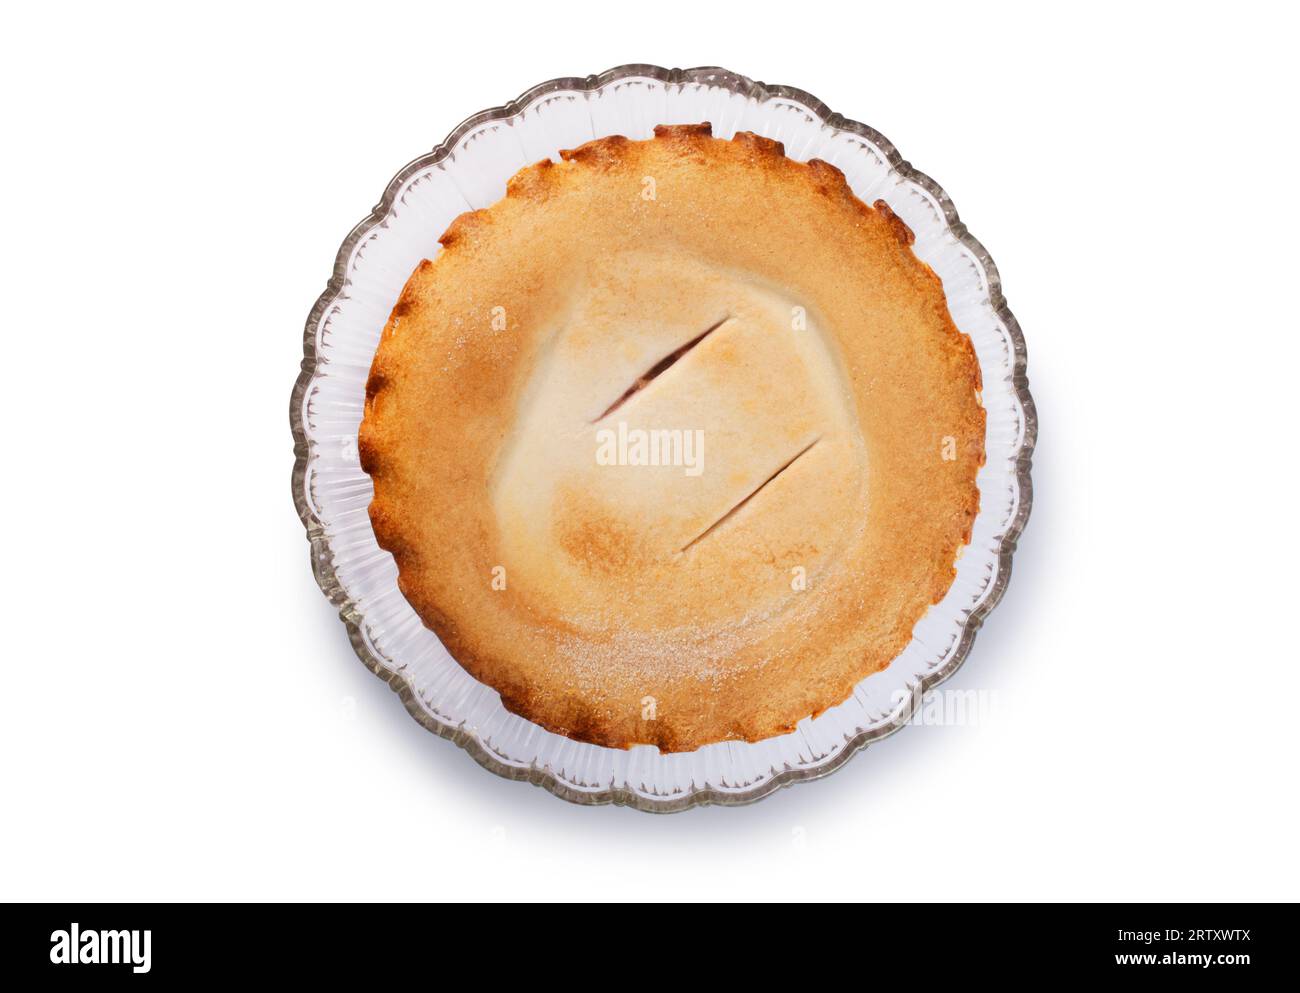 Studio shot of a whole fruit pie resting on a glass plate cut out against a white background - John Gollop Stock Photo